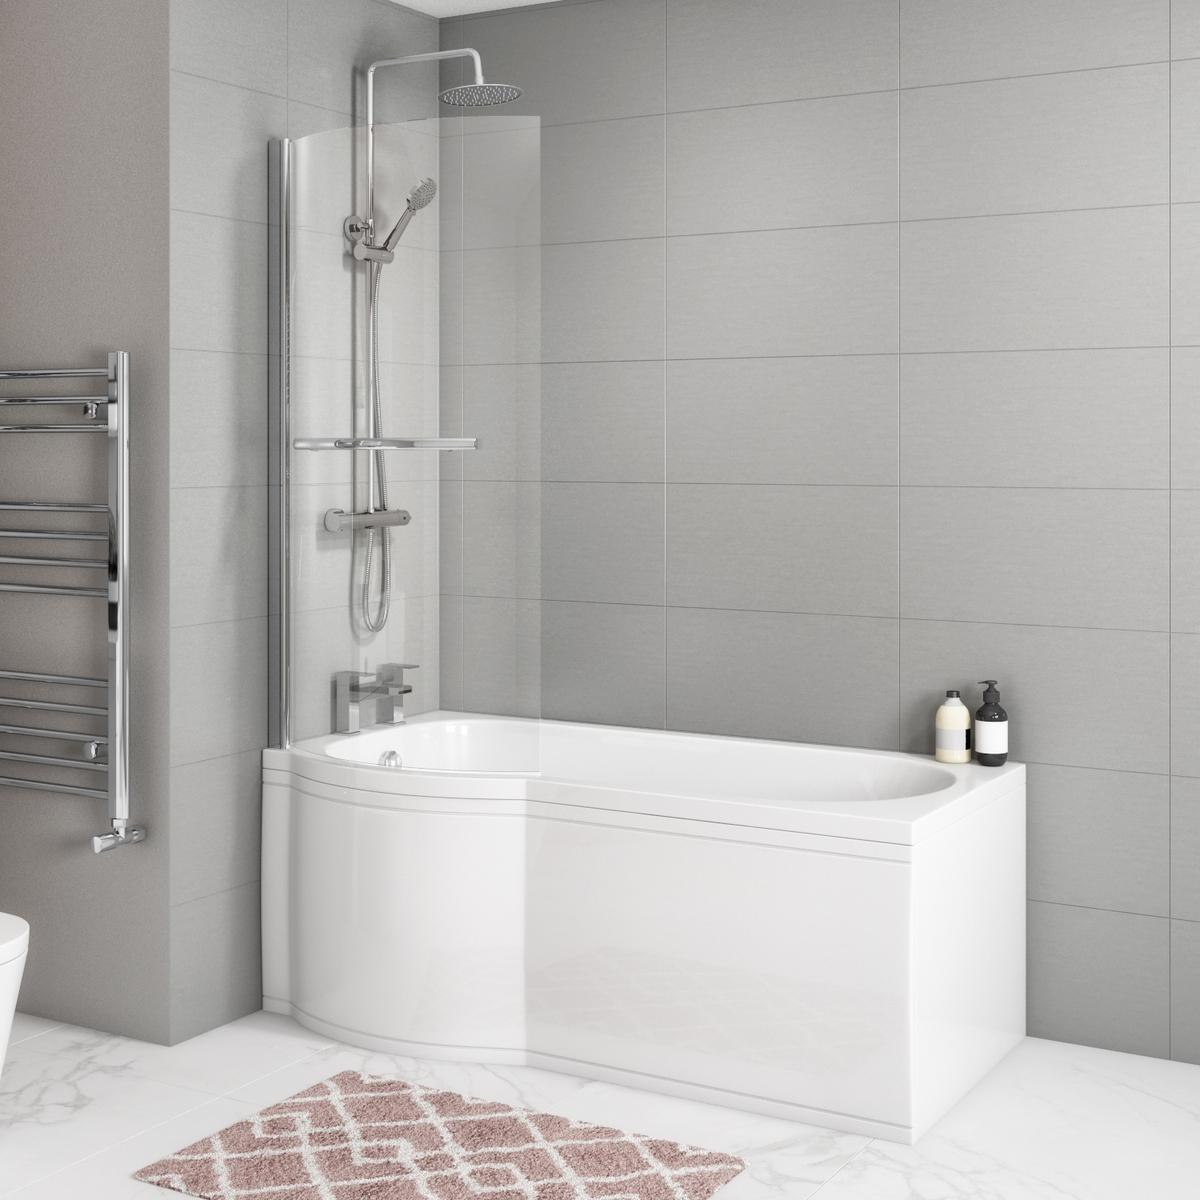 Modern styled bathroom with p shaped bath with chrome shower and chrome radiator.